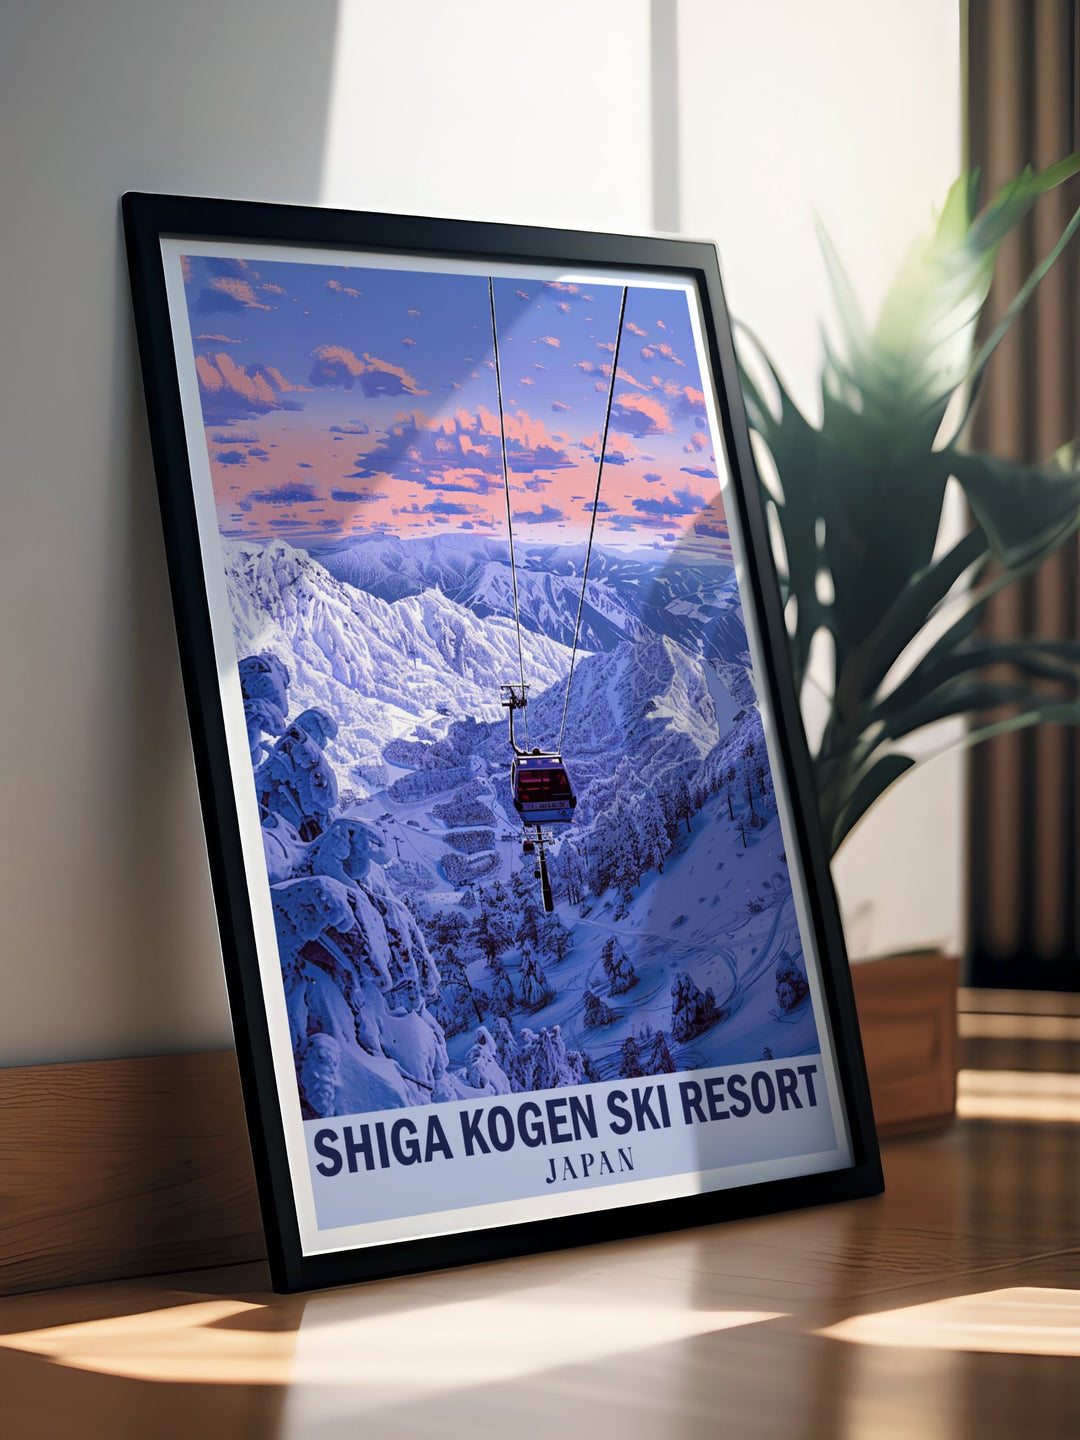 Shiga Kogen is beautifully illustrated in this poster, featuring the interconnected ski areas and pristine slopes that make it Japans largest ski resort, inviting viewers to imagine an exhilarating winter adventure.